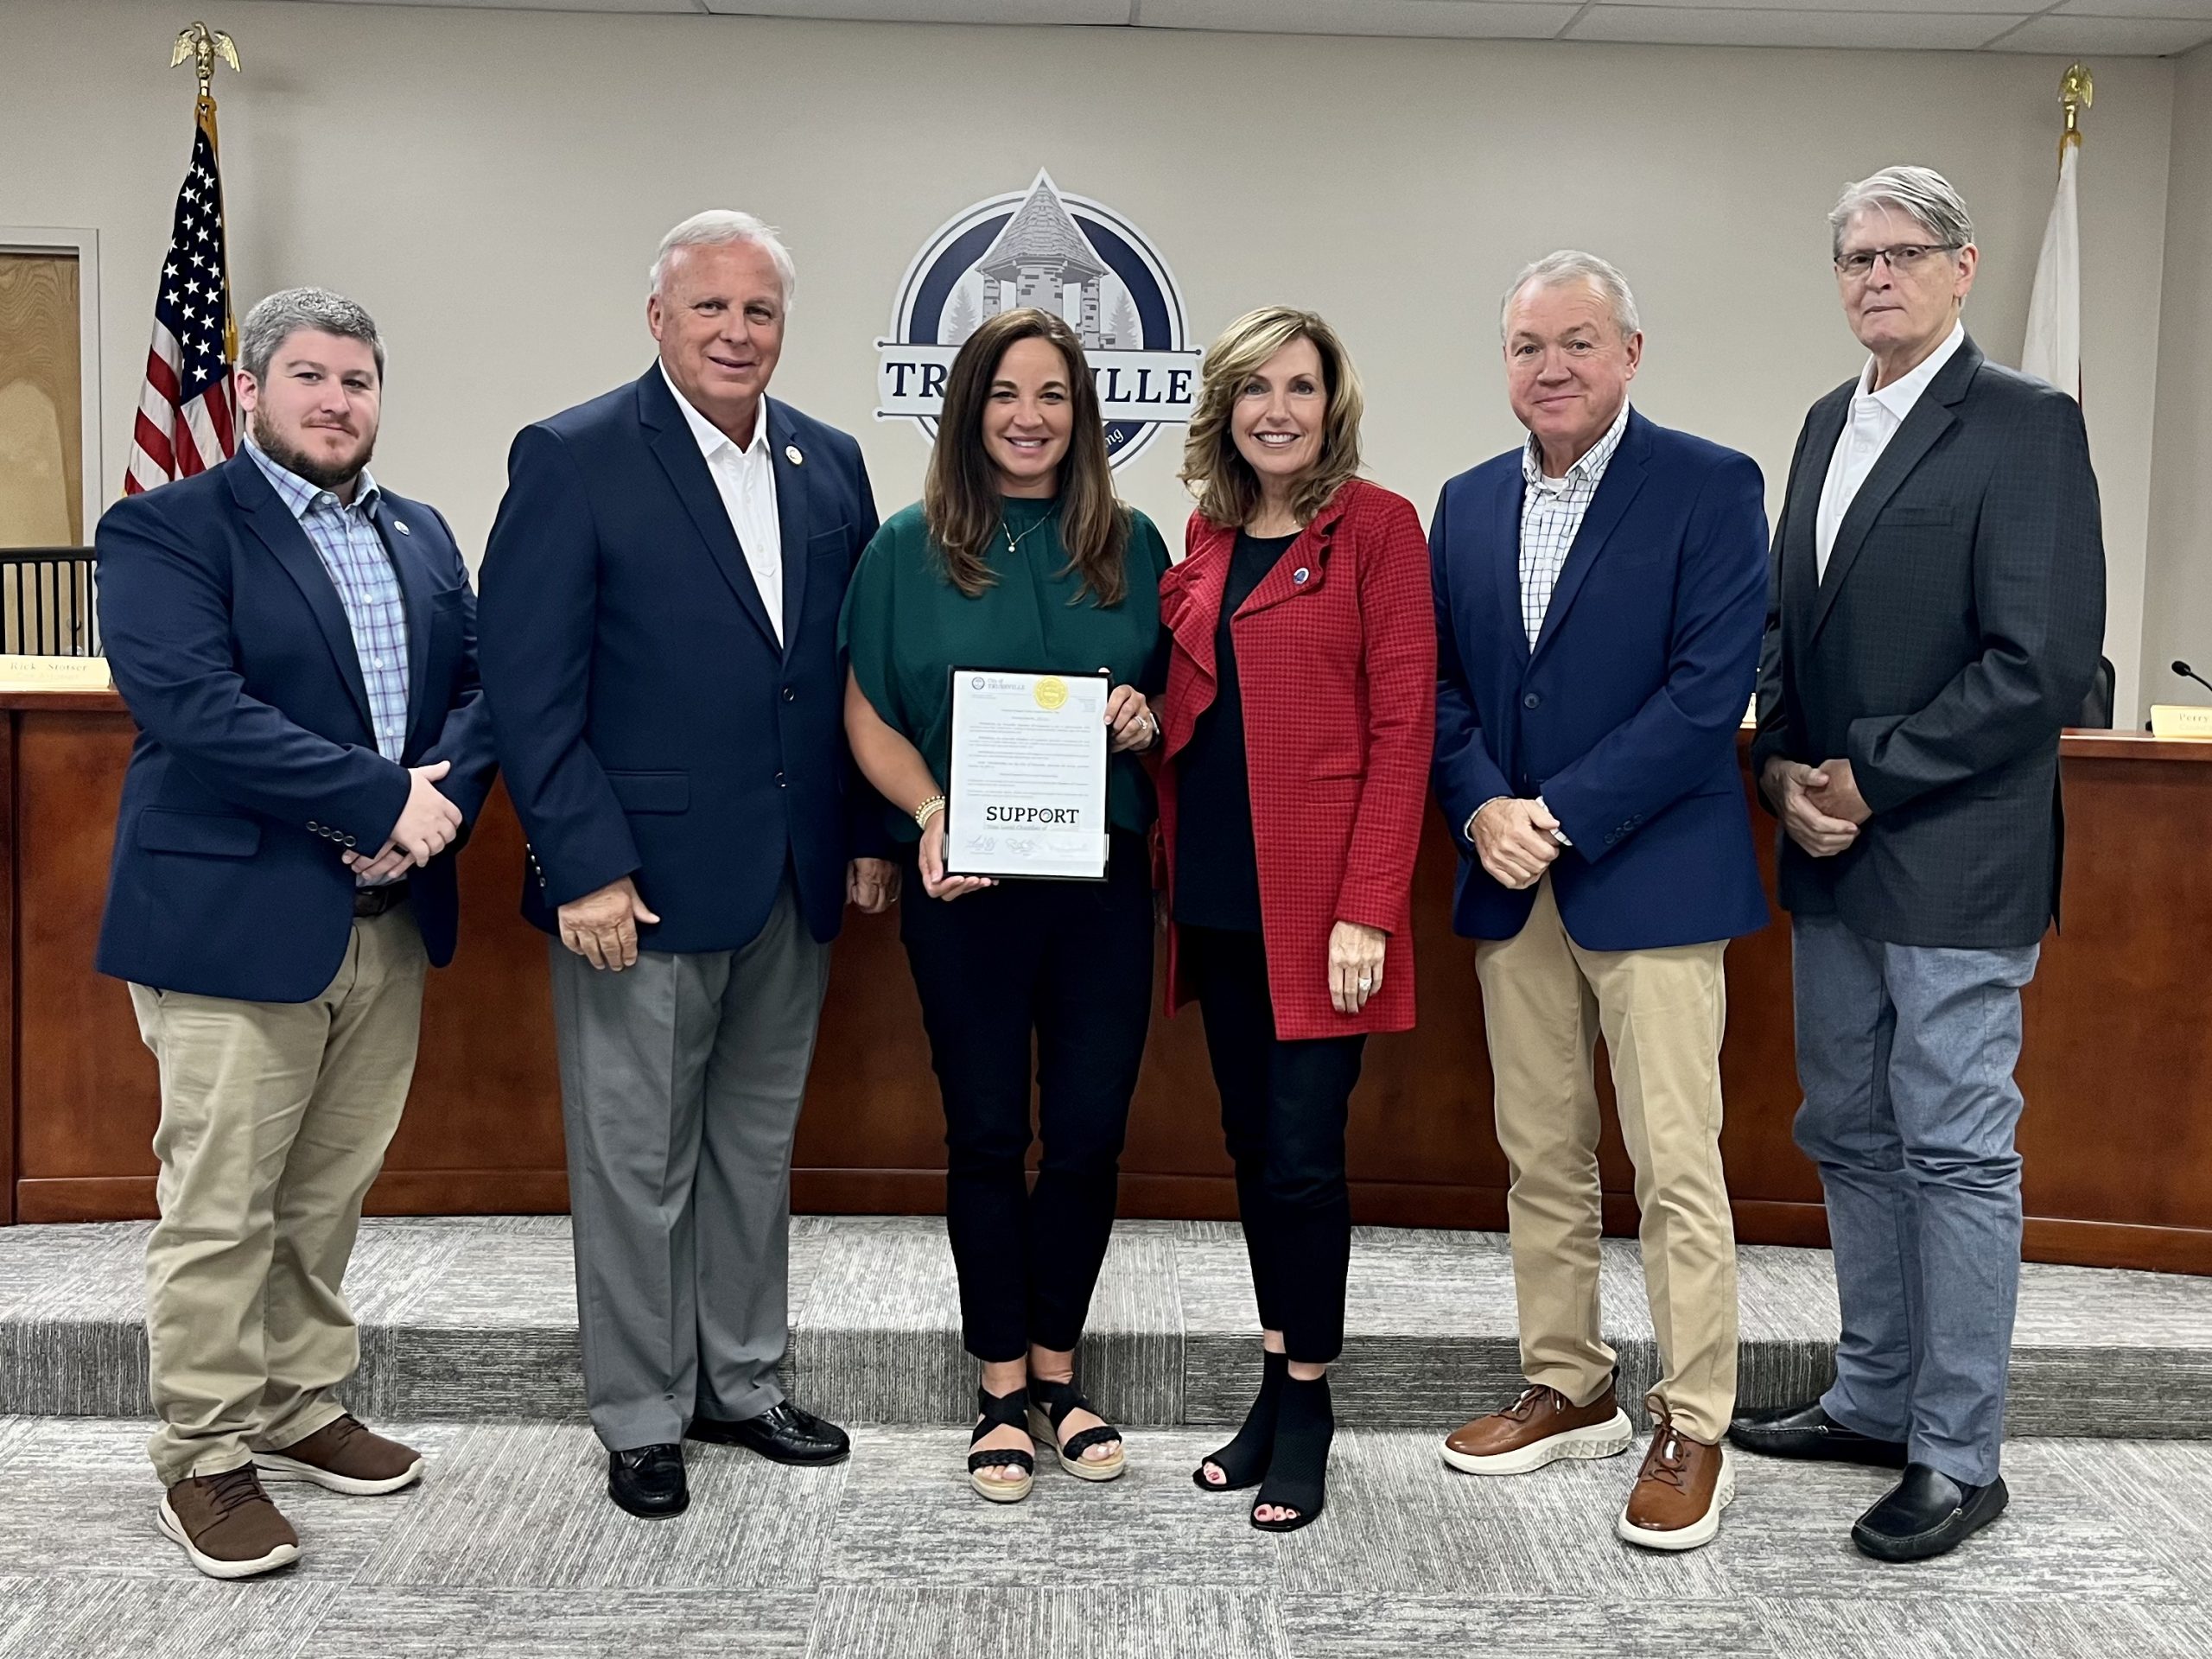 Trussville Council proclaims October 18 Support Your Local Chamber Day, Turning Trussville Pink Day